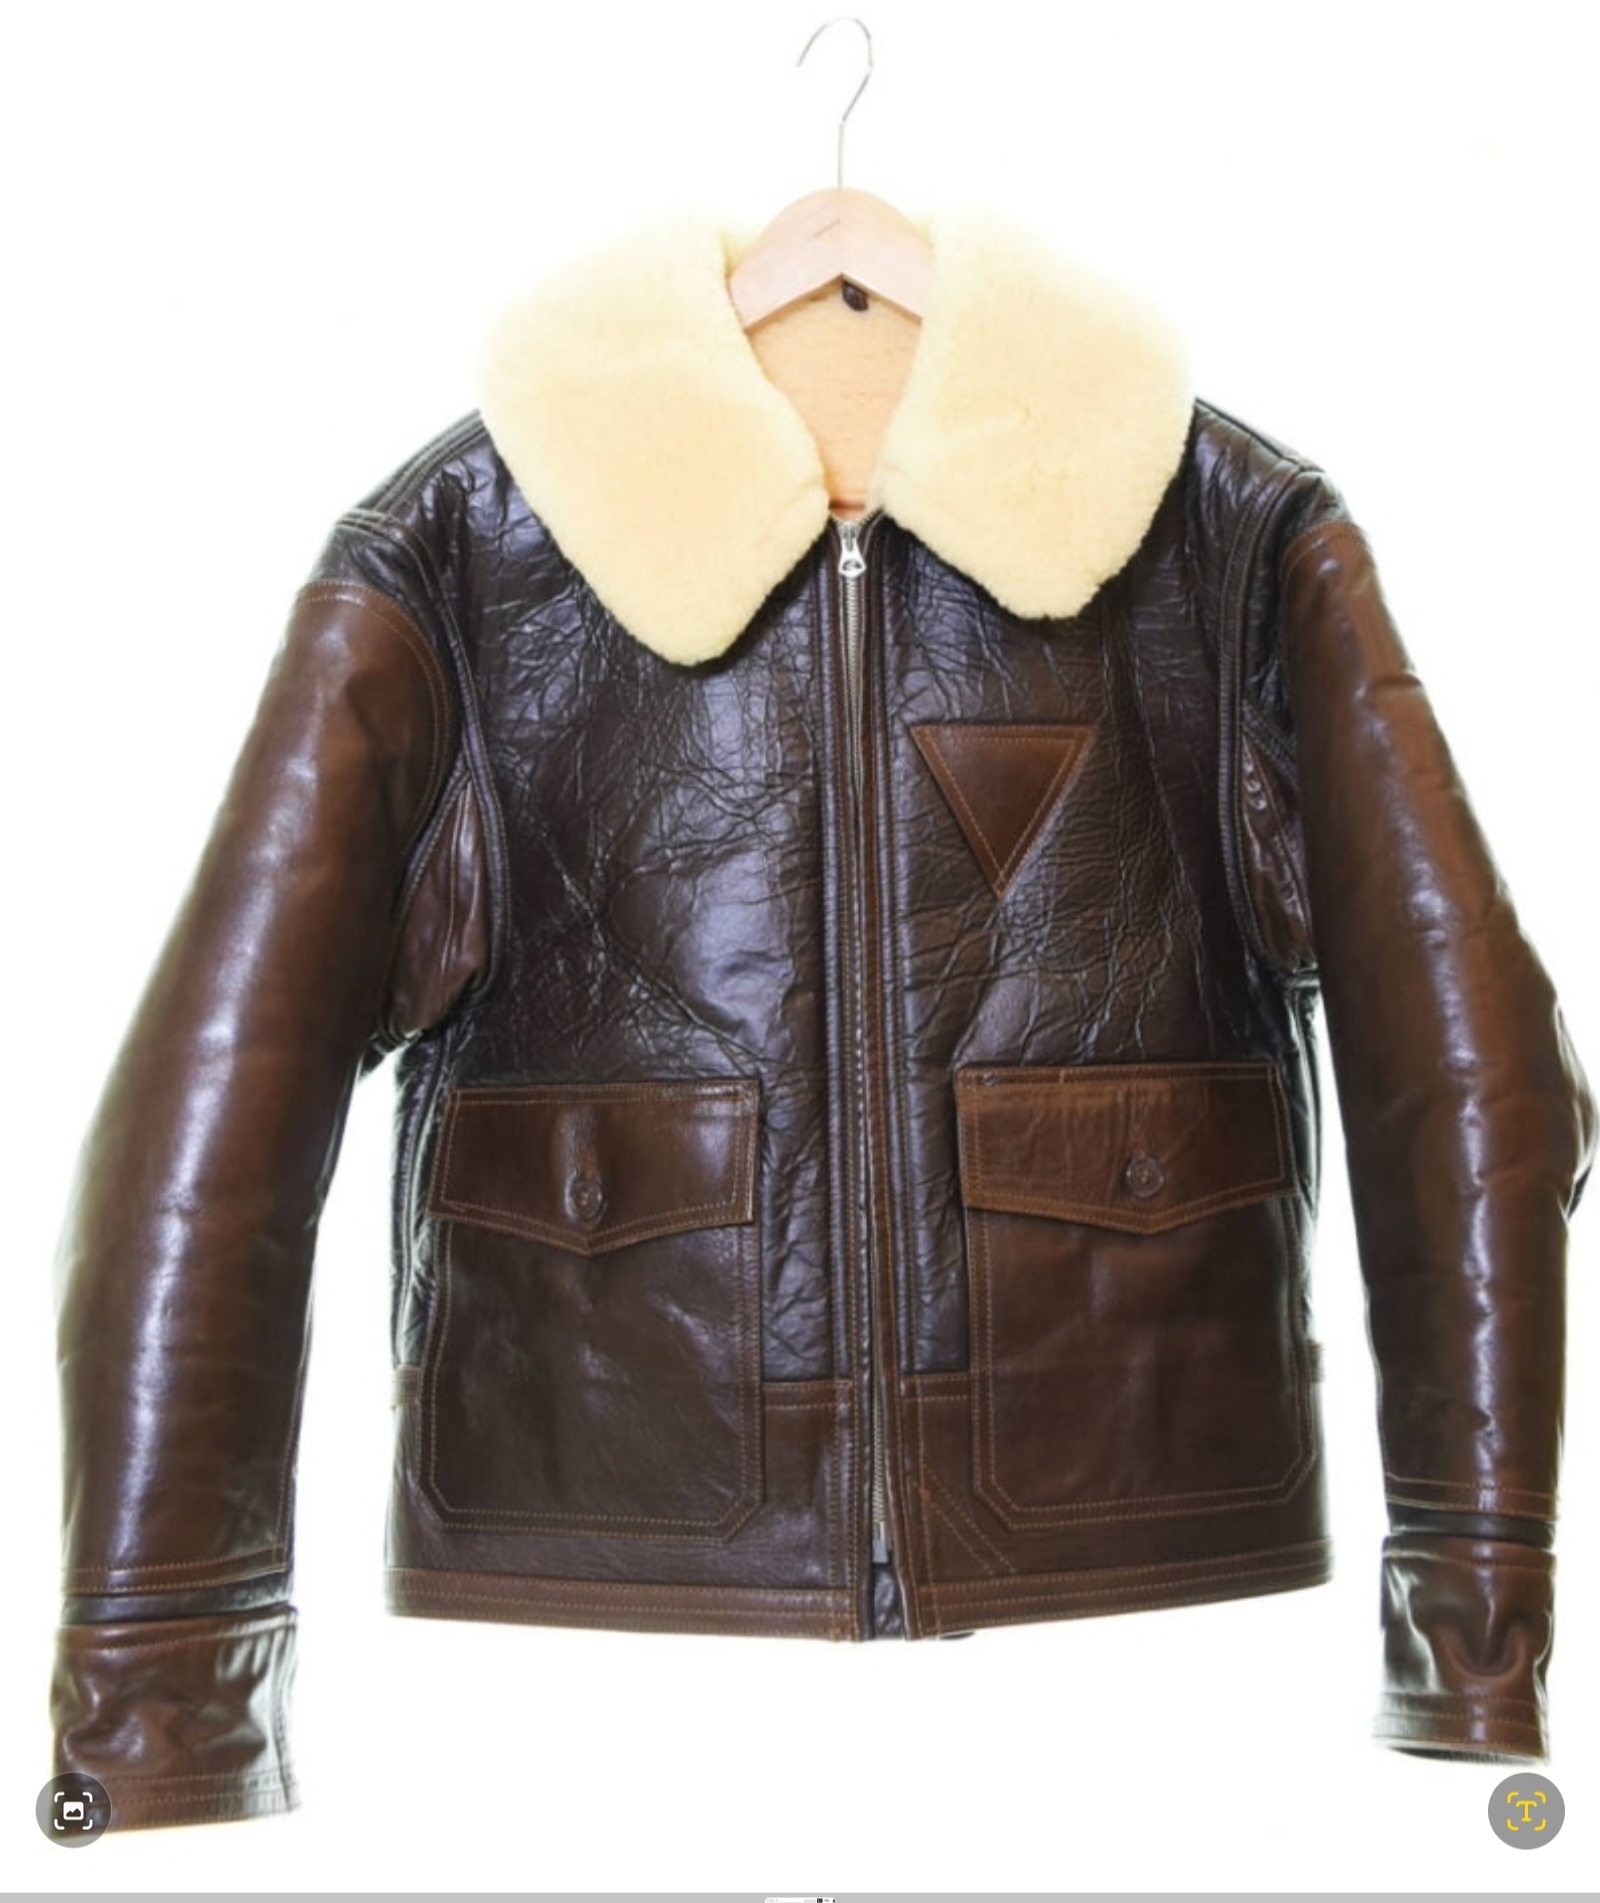 Who made this ? | Vintage Leather Jackets Forum